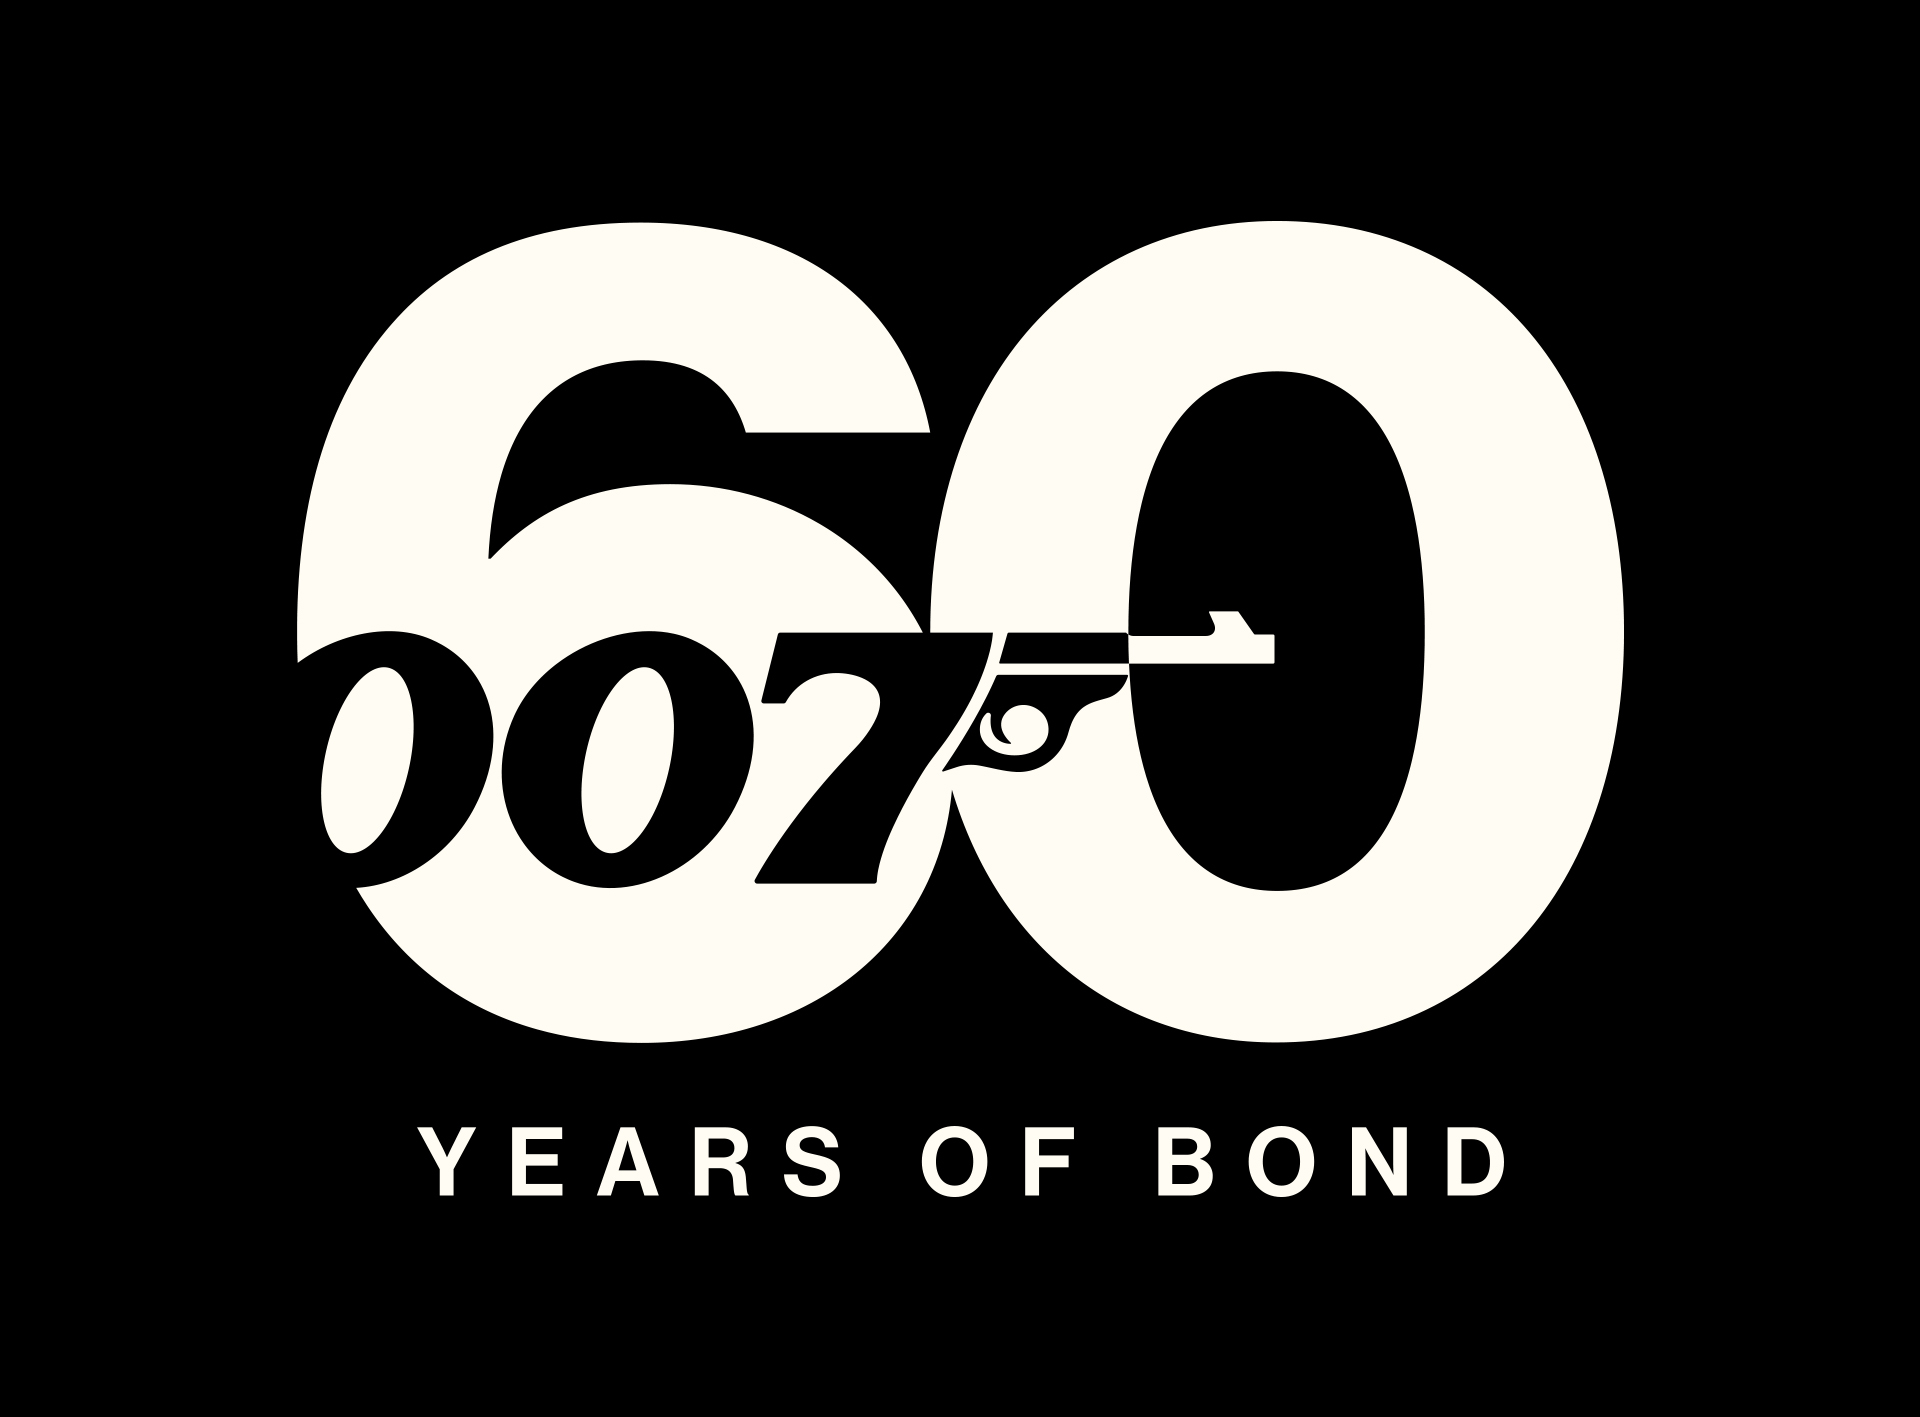 Marketing image showing the line “60 years pf bond” and "007" set against a black background